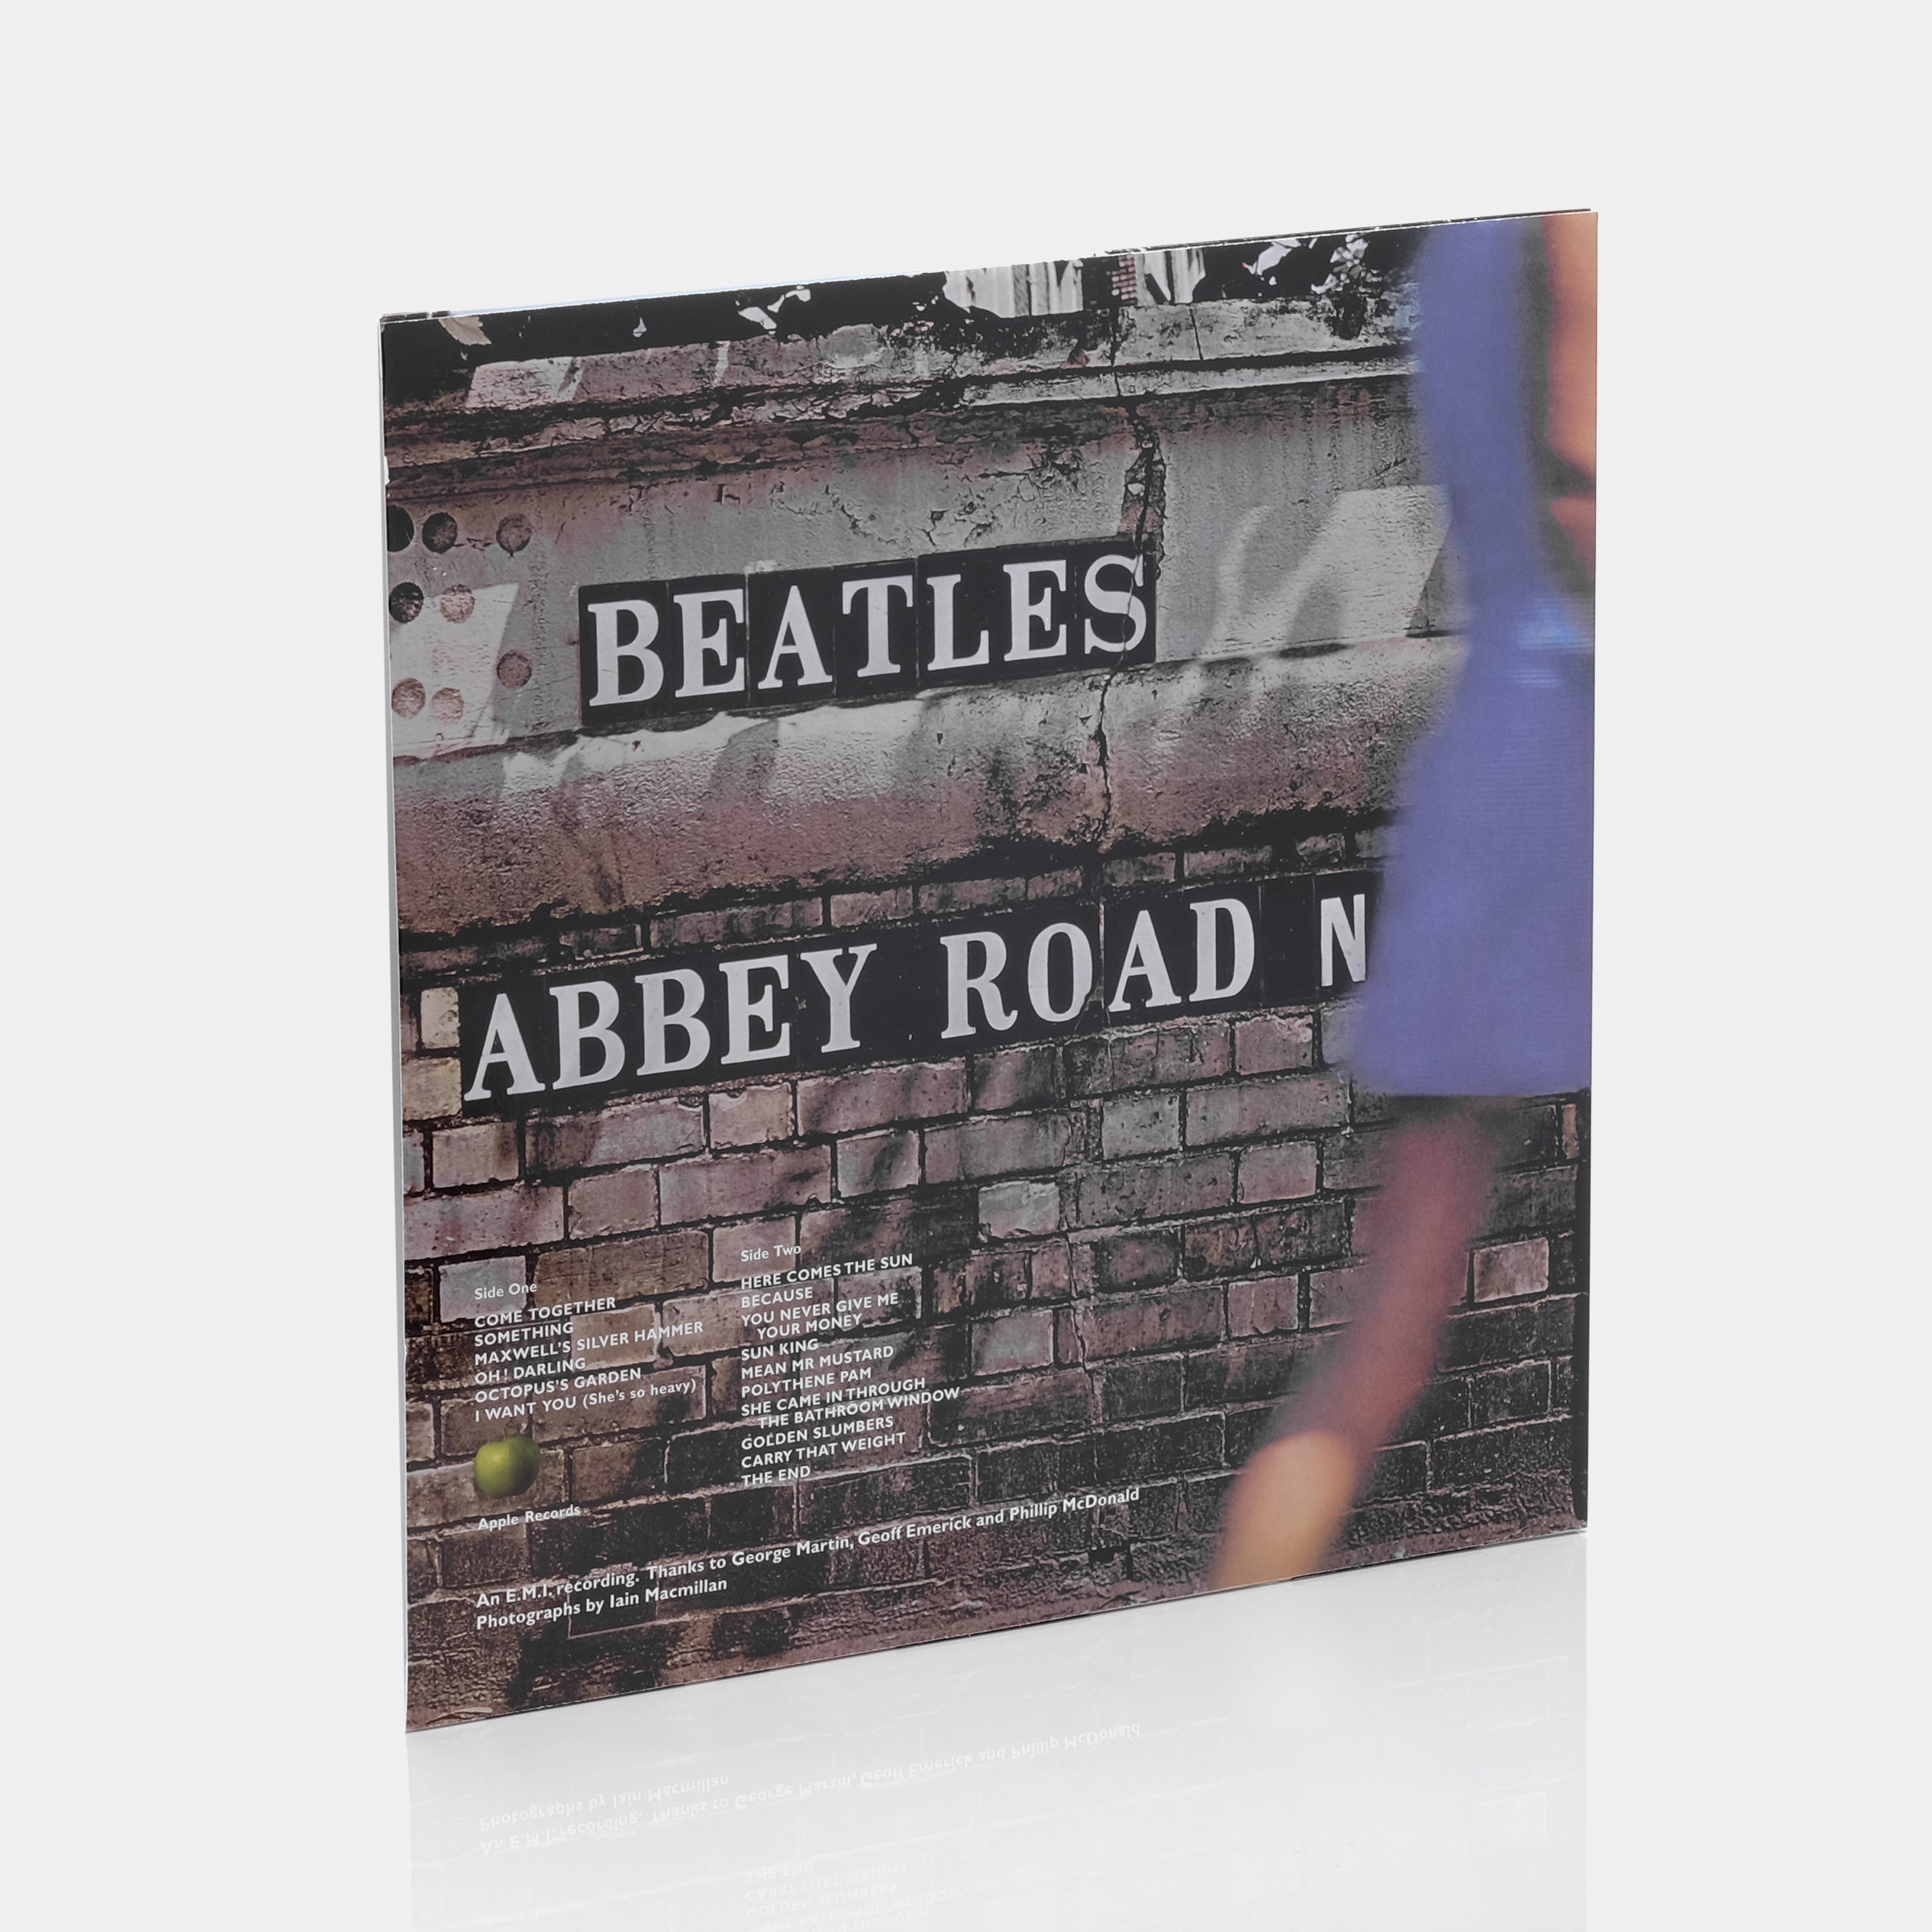 The Beatles - Abbey Road (50th Anniversary Edition) LP Vinyl Record